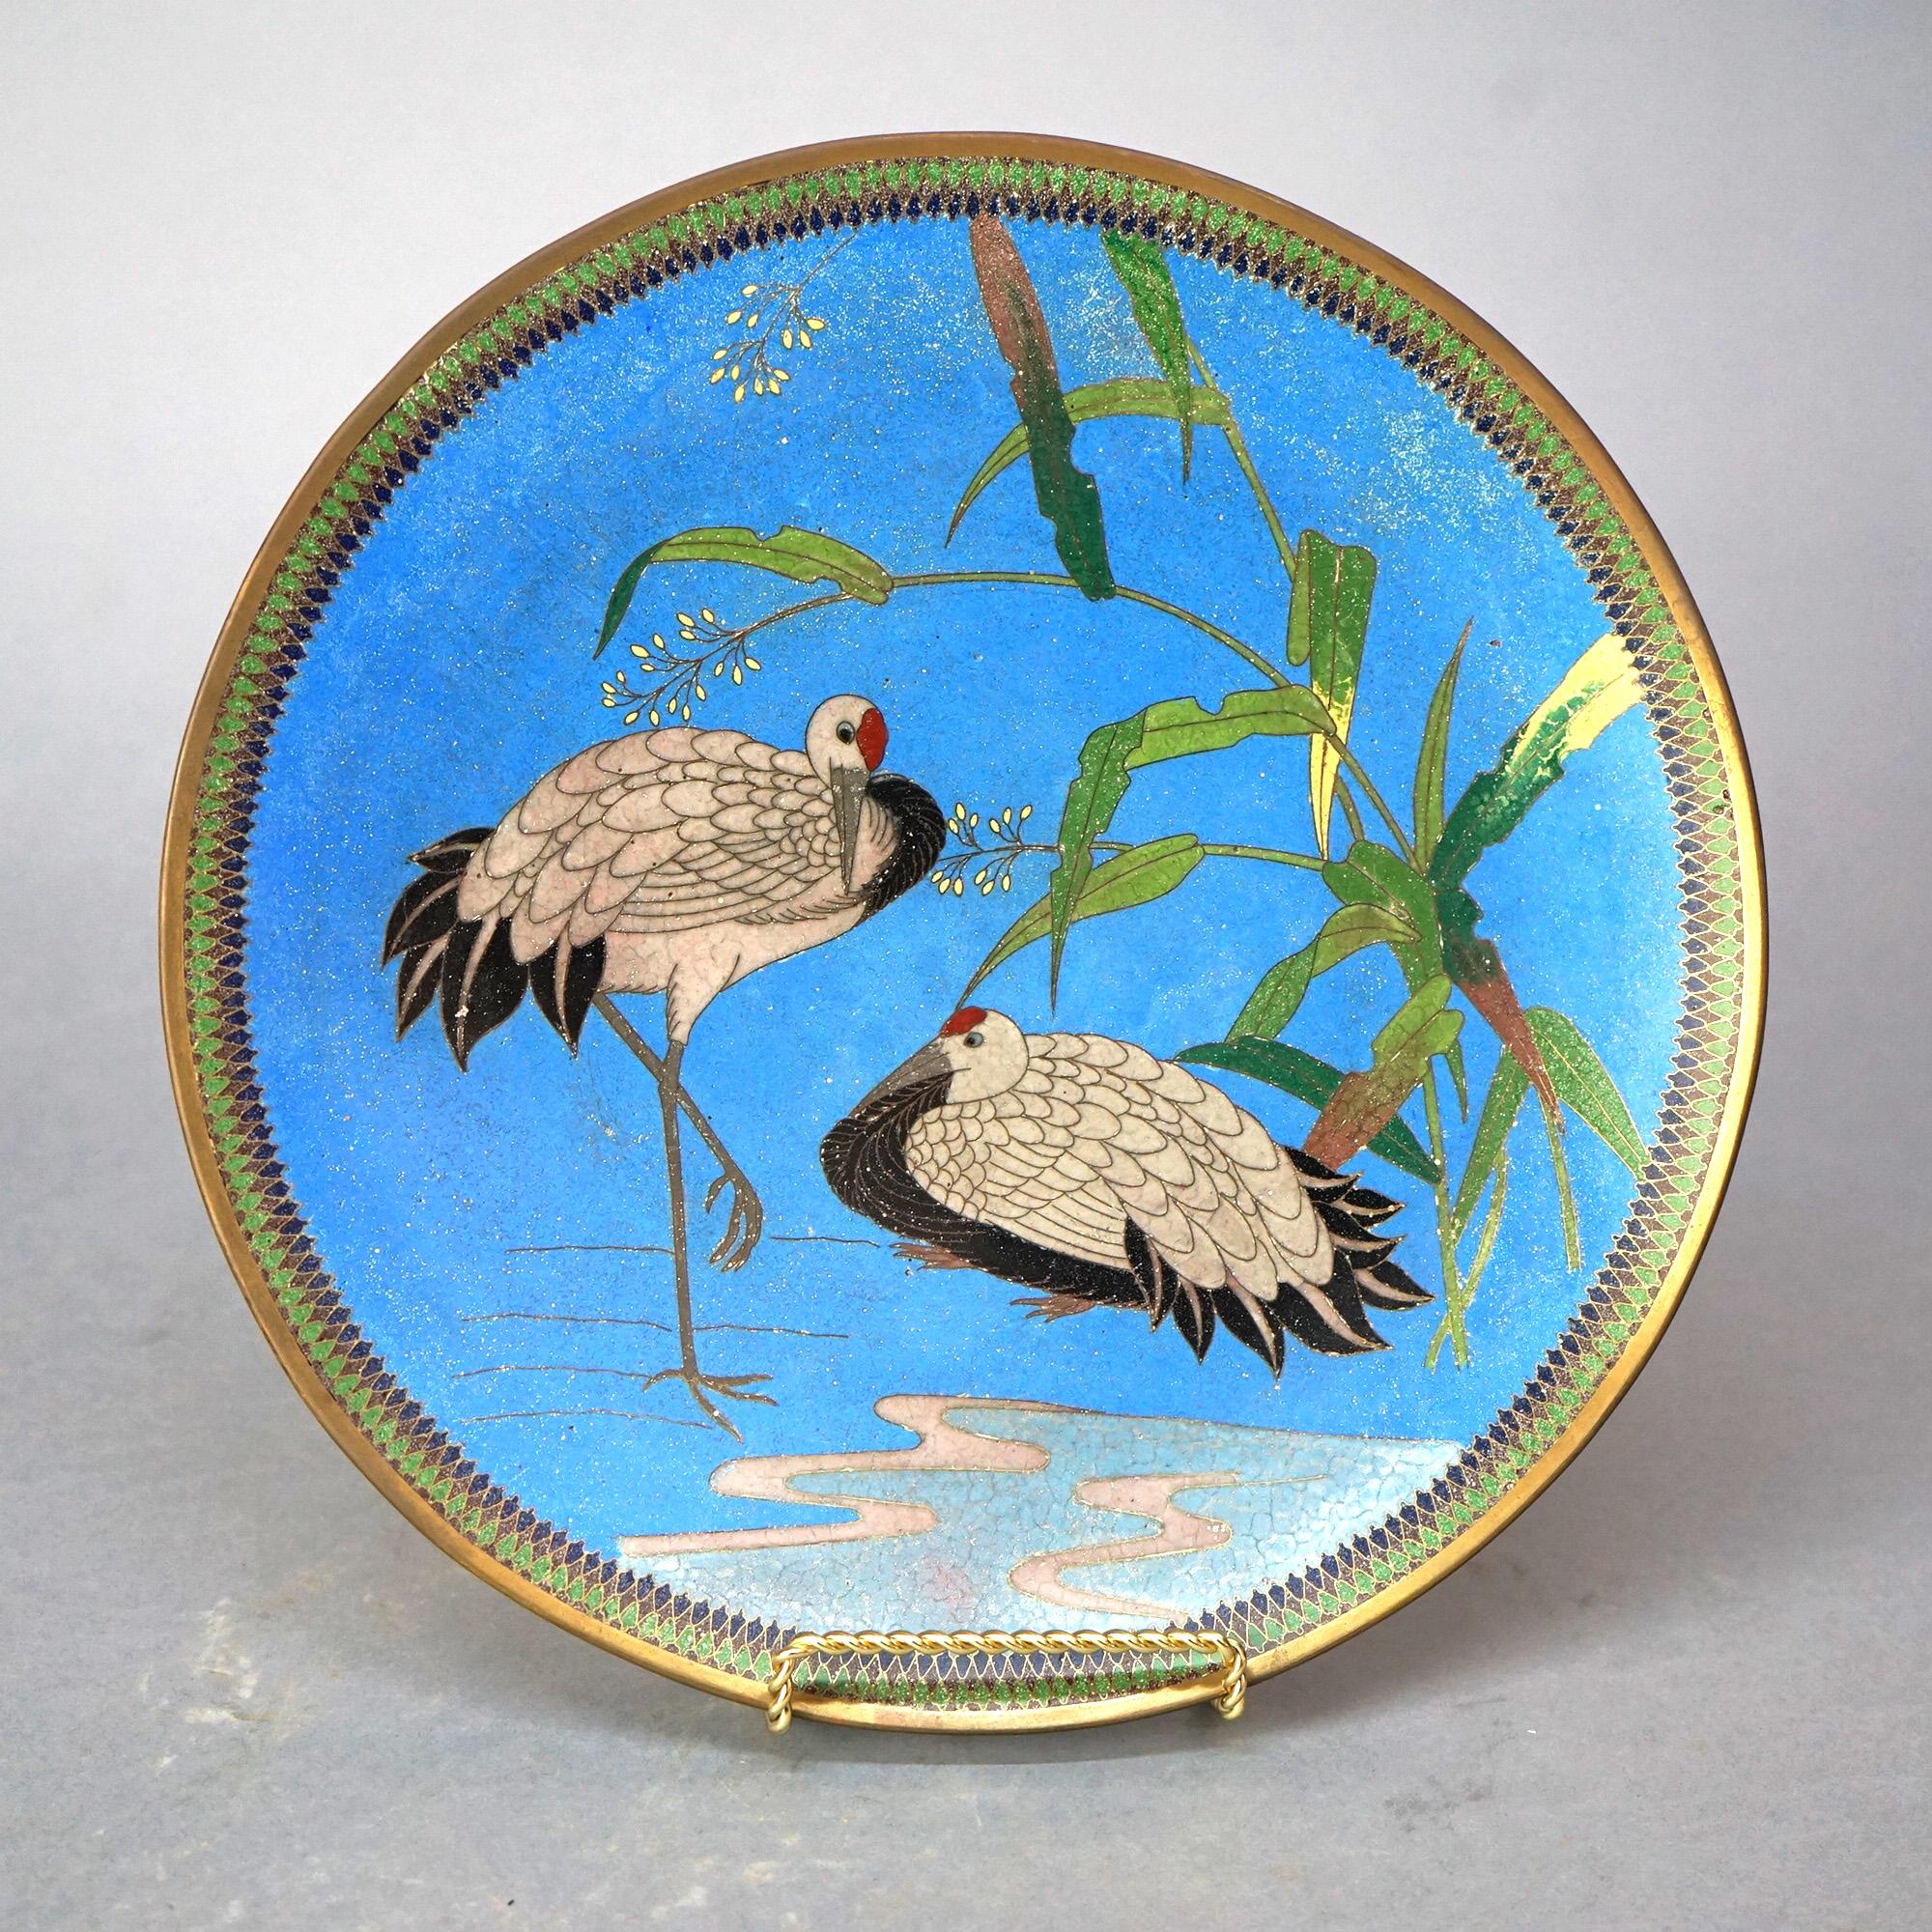 Antique Japanese Meiji Cloisonné Enameled Charger with Marsh Scene & Herons, C1920

Measures - 12